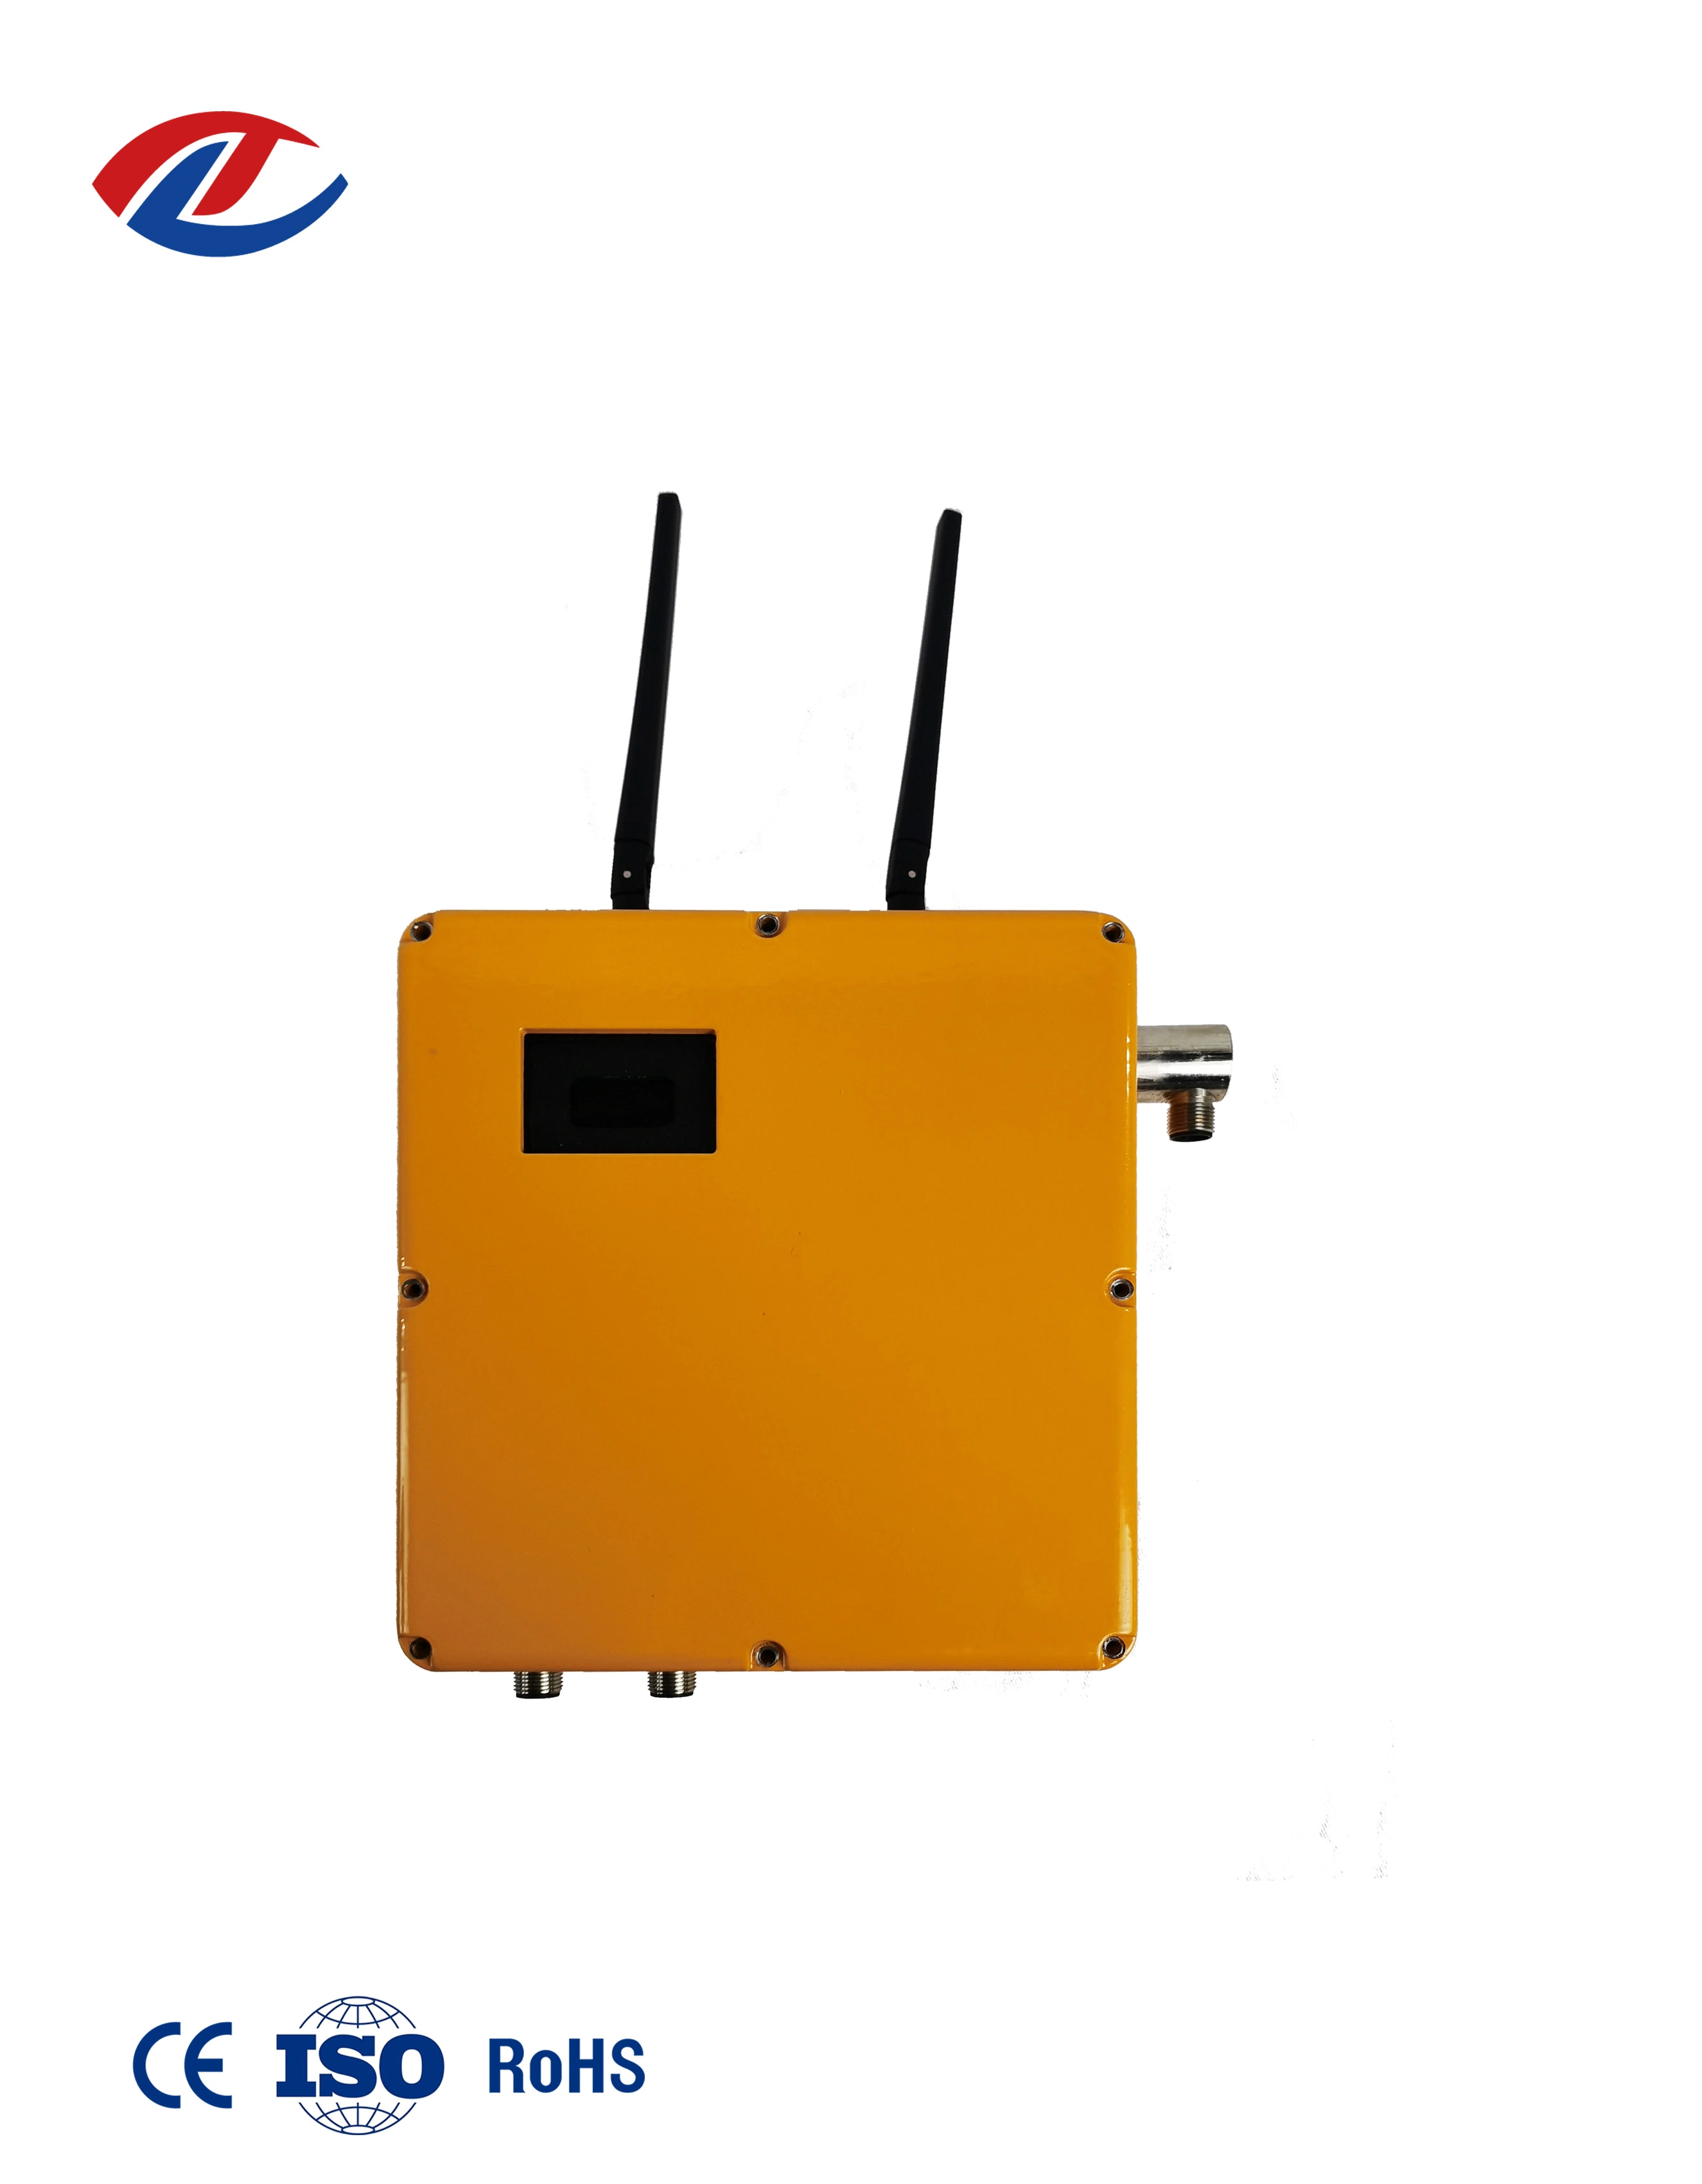 Industrial Methane Gas Sensor Remote Terminal for Confined Space Test